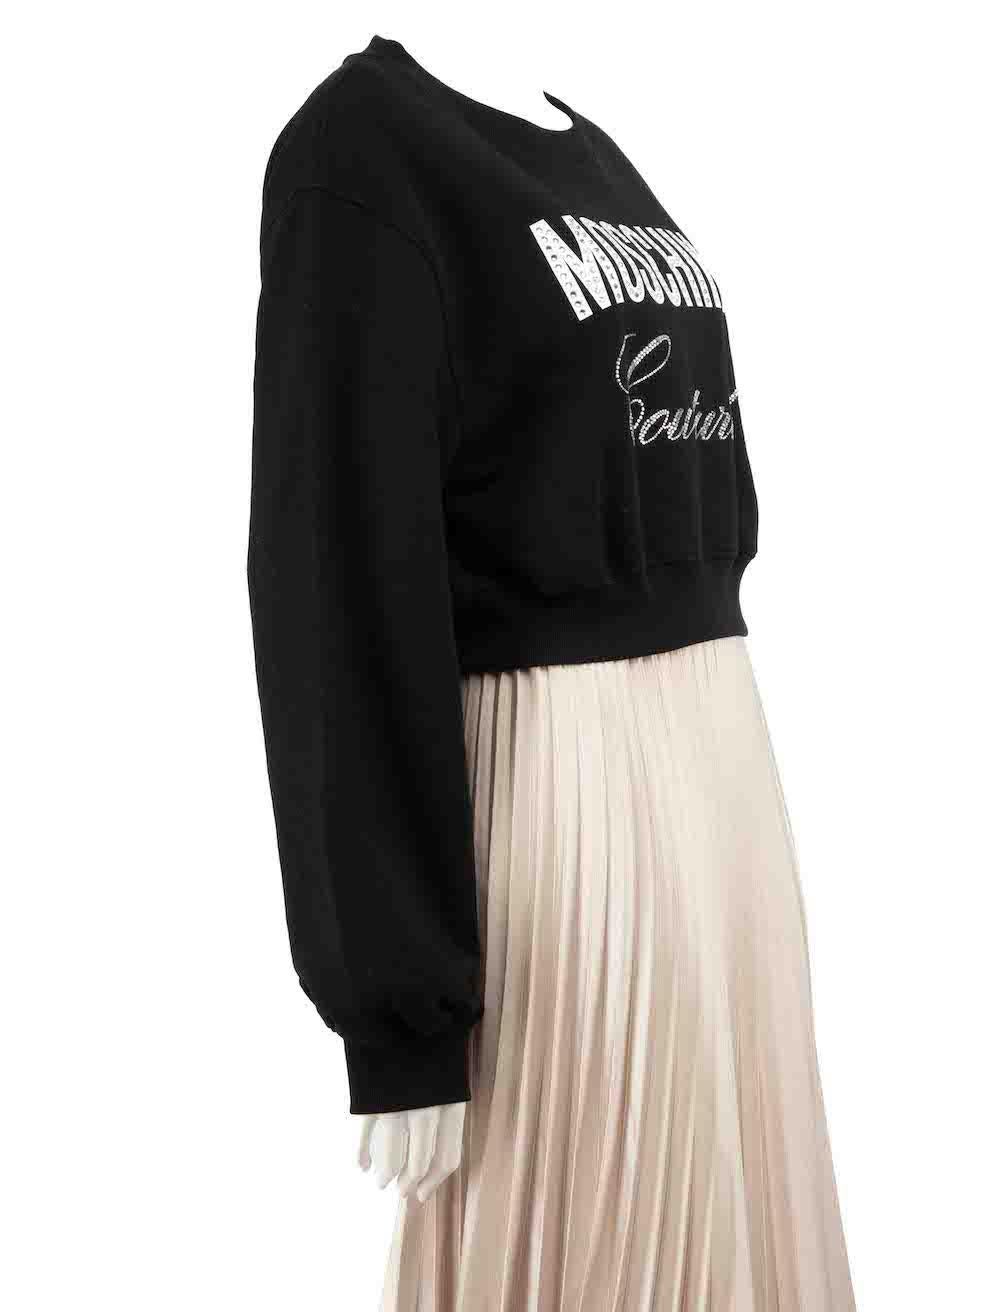 CONDITION is Never worn, with tags. No visible wear to jumper is evident on this new Moschino Couture! designer resale item.
 
 Details
 Black
 Cotton
 Sweatshirt
 Rhinestone embellished logo
 Cropped fit
 Long sleeves
 Round neck
 
 
 Made in